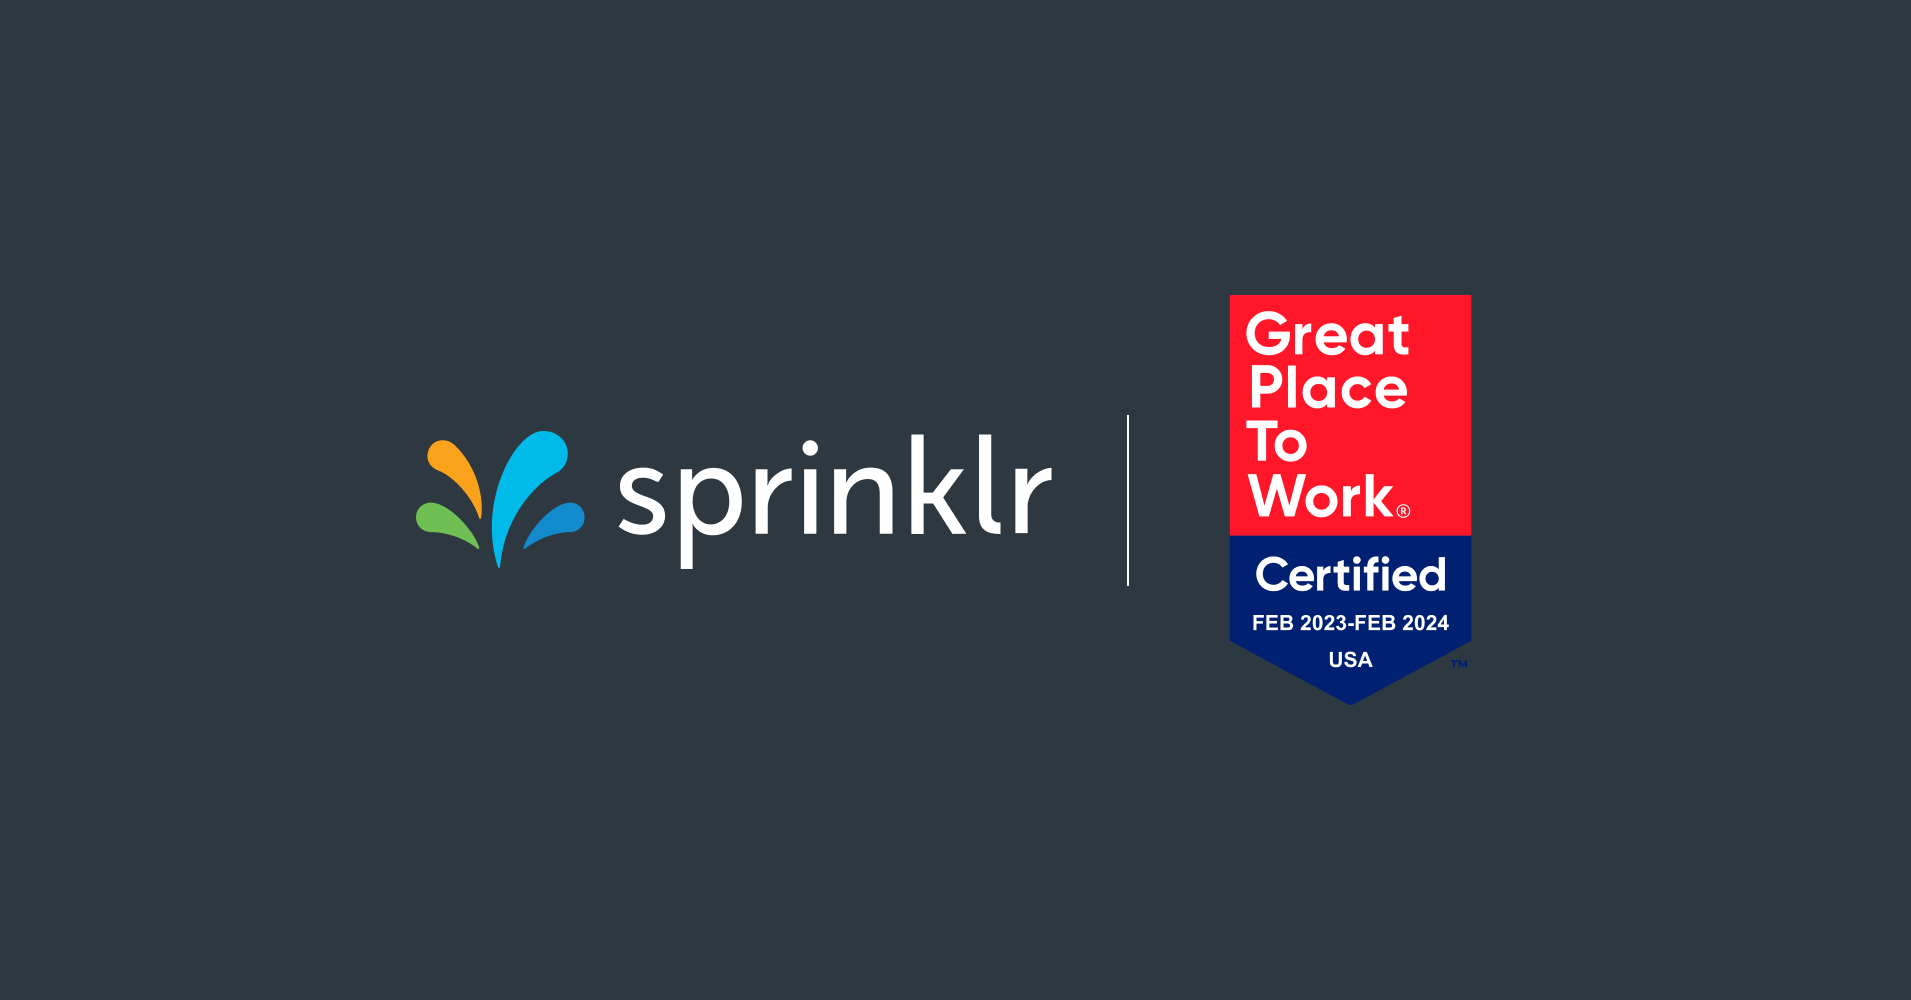 Sprinklr Recognized as Great Place To Work for Third Year in a Row